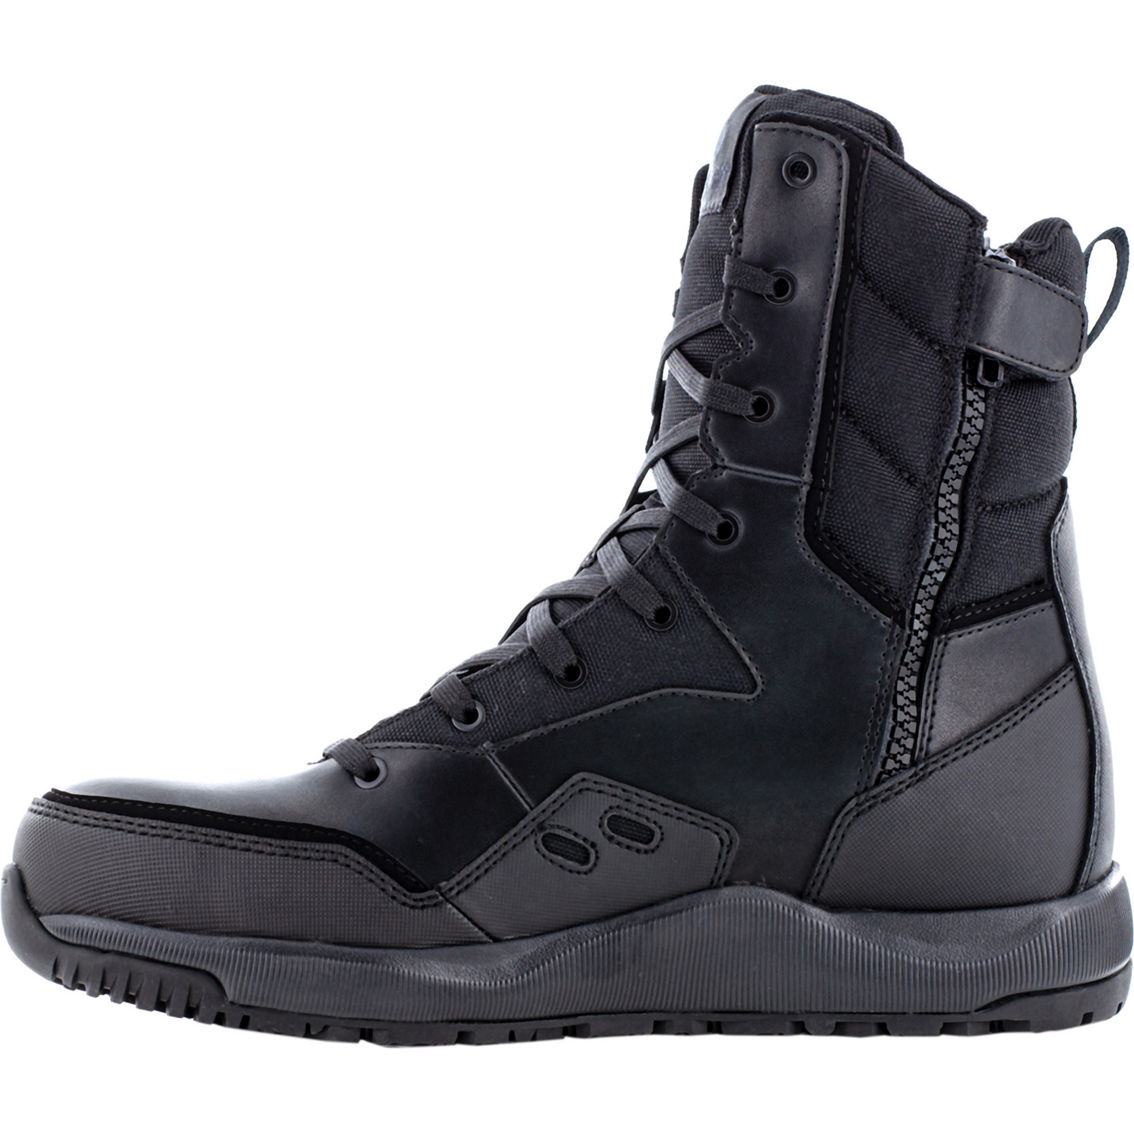 Volcom Street Shield VM30704 ASTM F2413 Electrical Hazard Protection Boots - Image 4 of 5